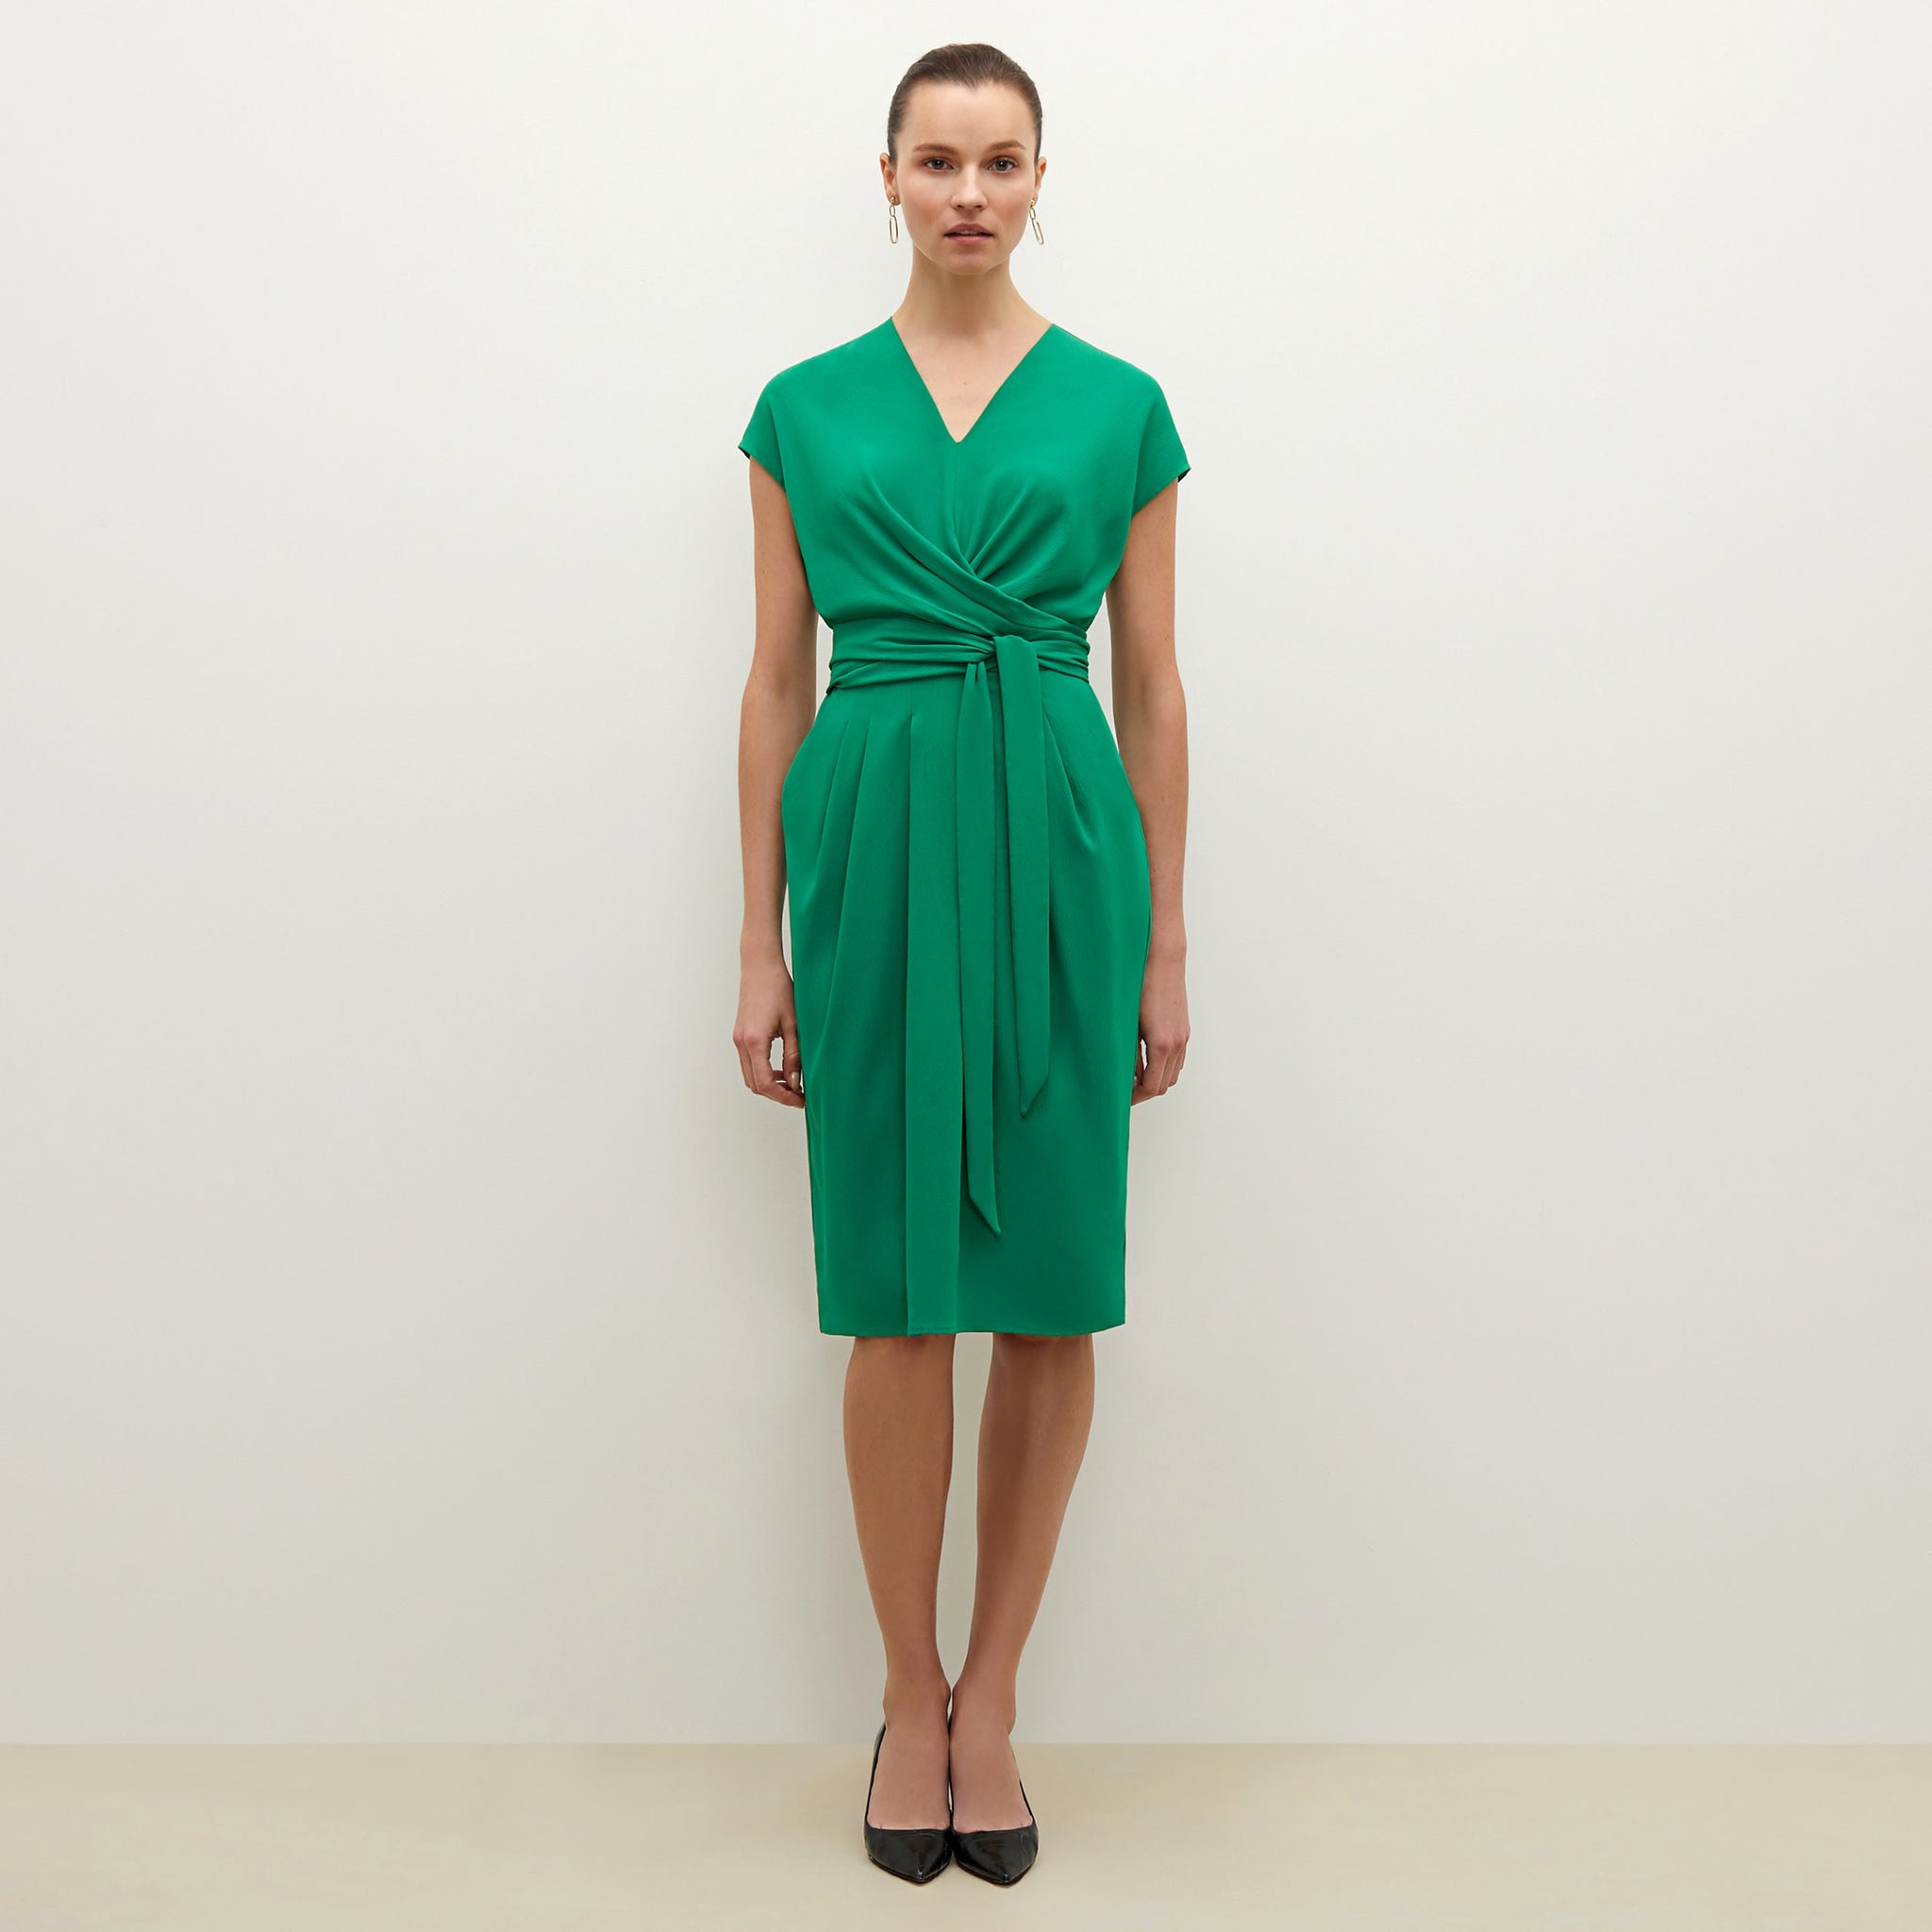 Front image of a woman standing wearing the Noel dress in emerald 